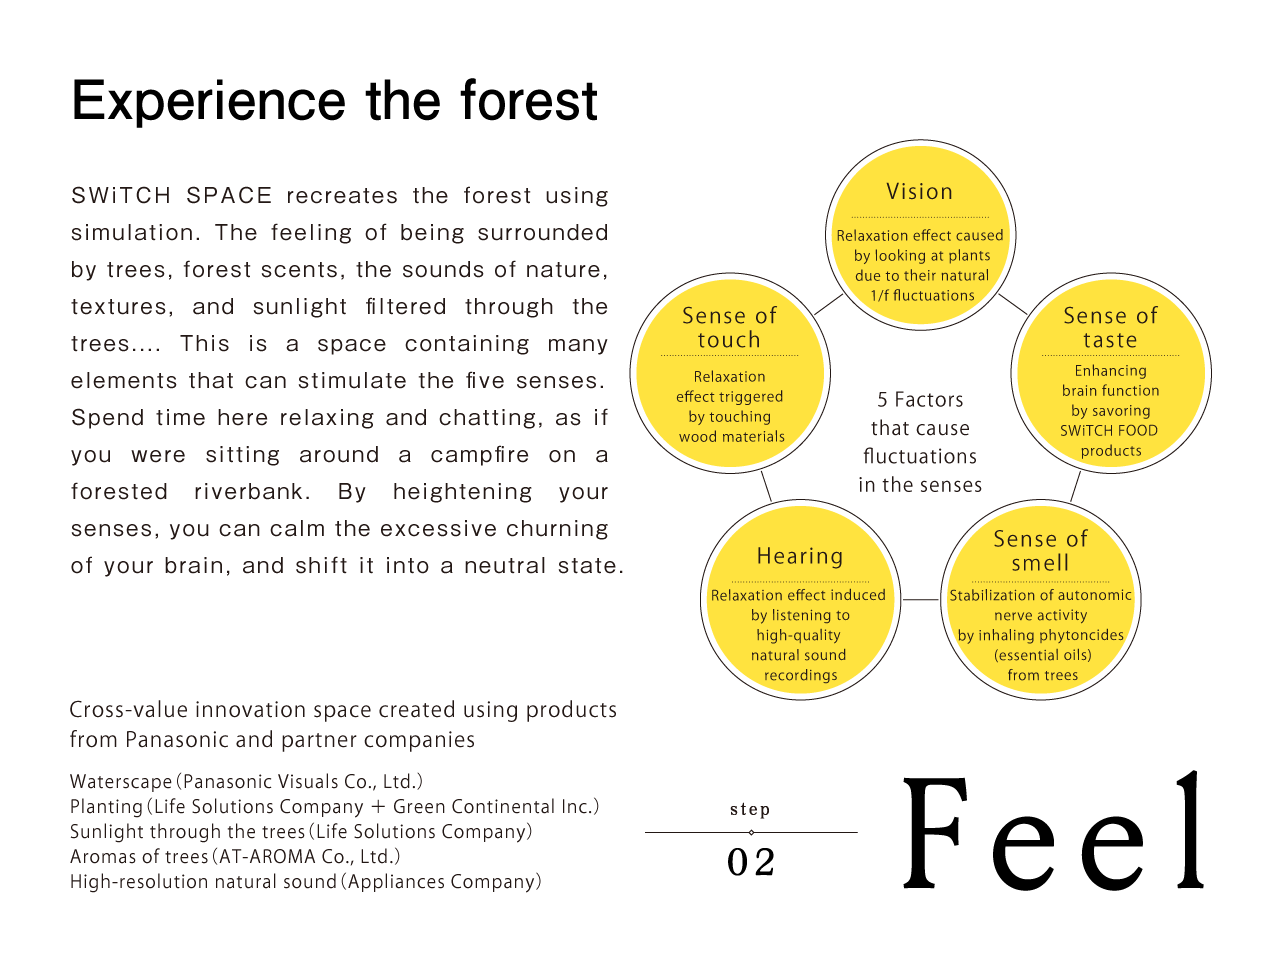 step02 Feel | Experience the forest　SWiTCH SPACE recreates the forest using simulation. The feeling of being surrounded by trees, forest scents, the sounds of nature, textures, and sunlight filtered through the trees.... This is a space containing many elements that can stimulate the five senses. Spend time here relaxing and chatting, as if you were sitting around a campfire on a forested riverbank. By heightening your senses, you can calm the excessive churning of your brain, and shift it into a neutral state.